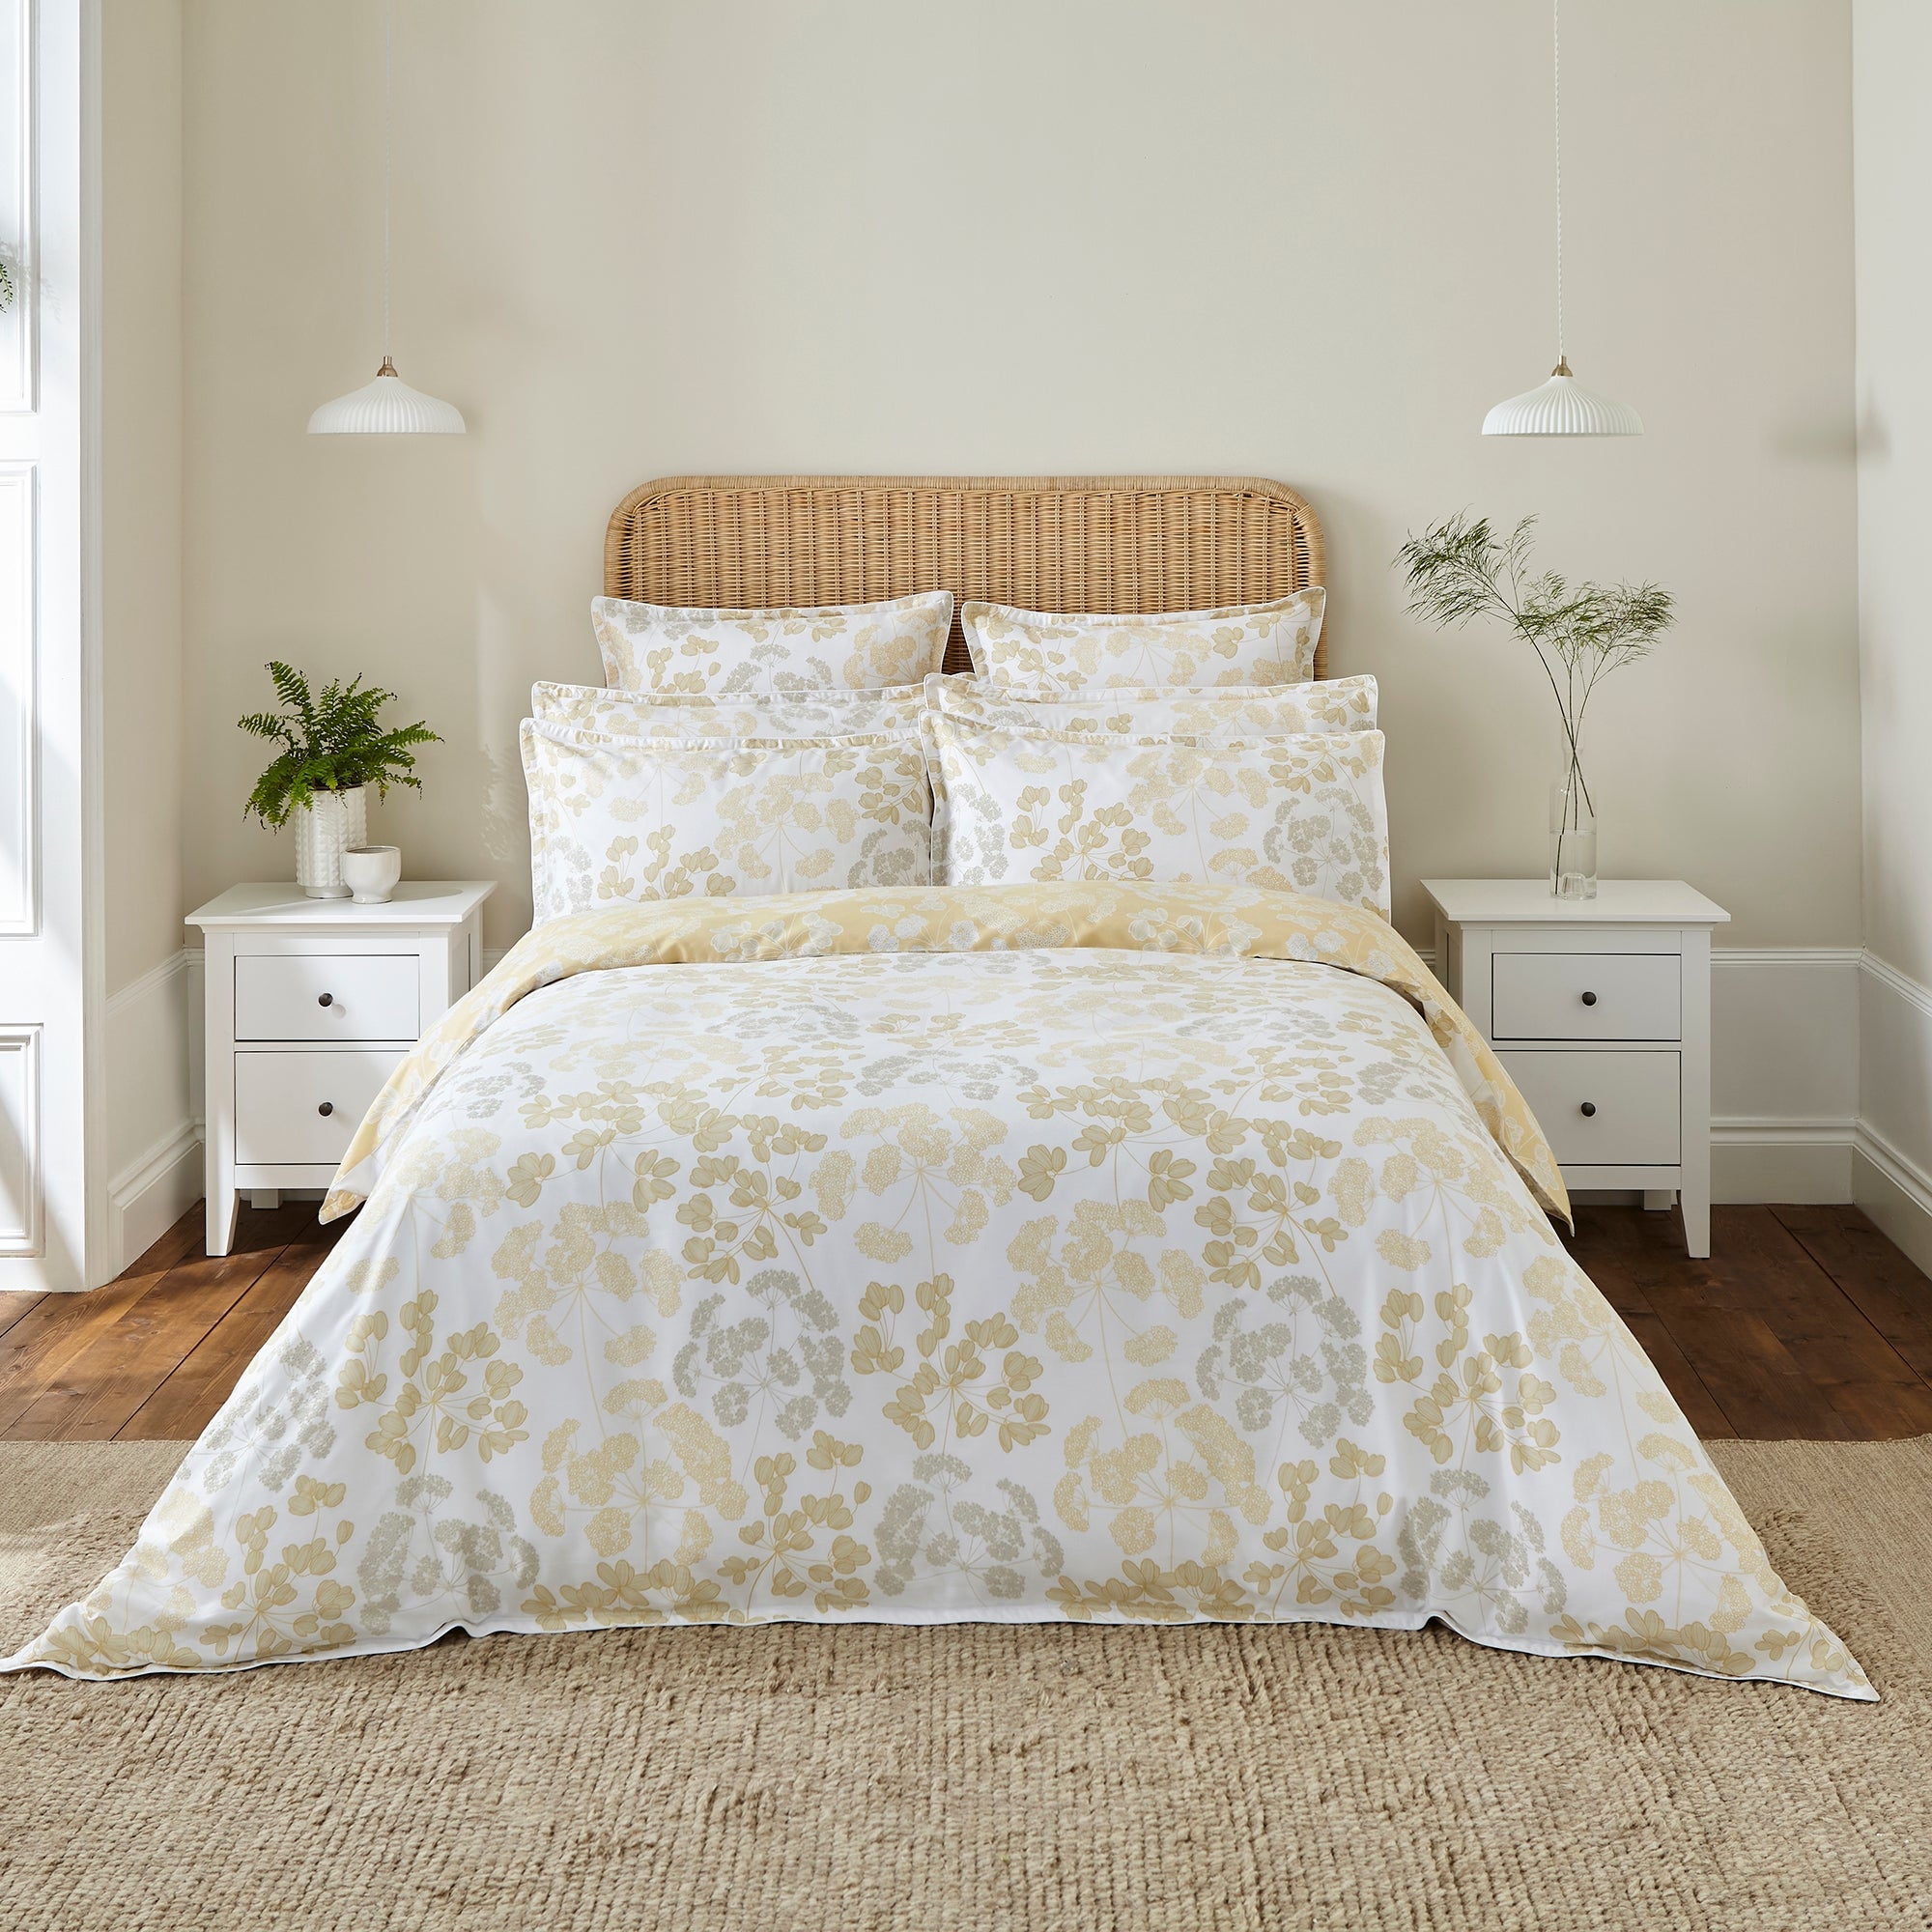 Dorma Daylesford 300 Thread Count Cotton Sateen Yellow Duvet Cover and Pillowcase Set Beige/White